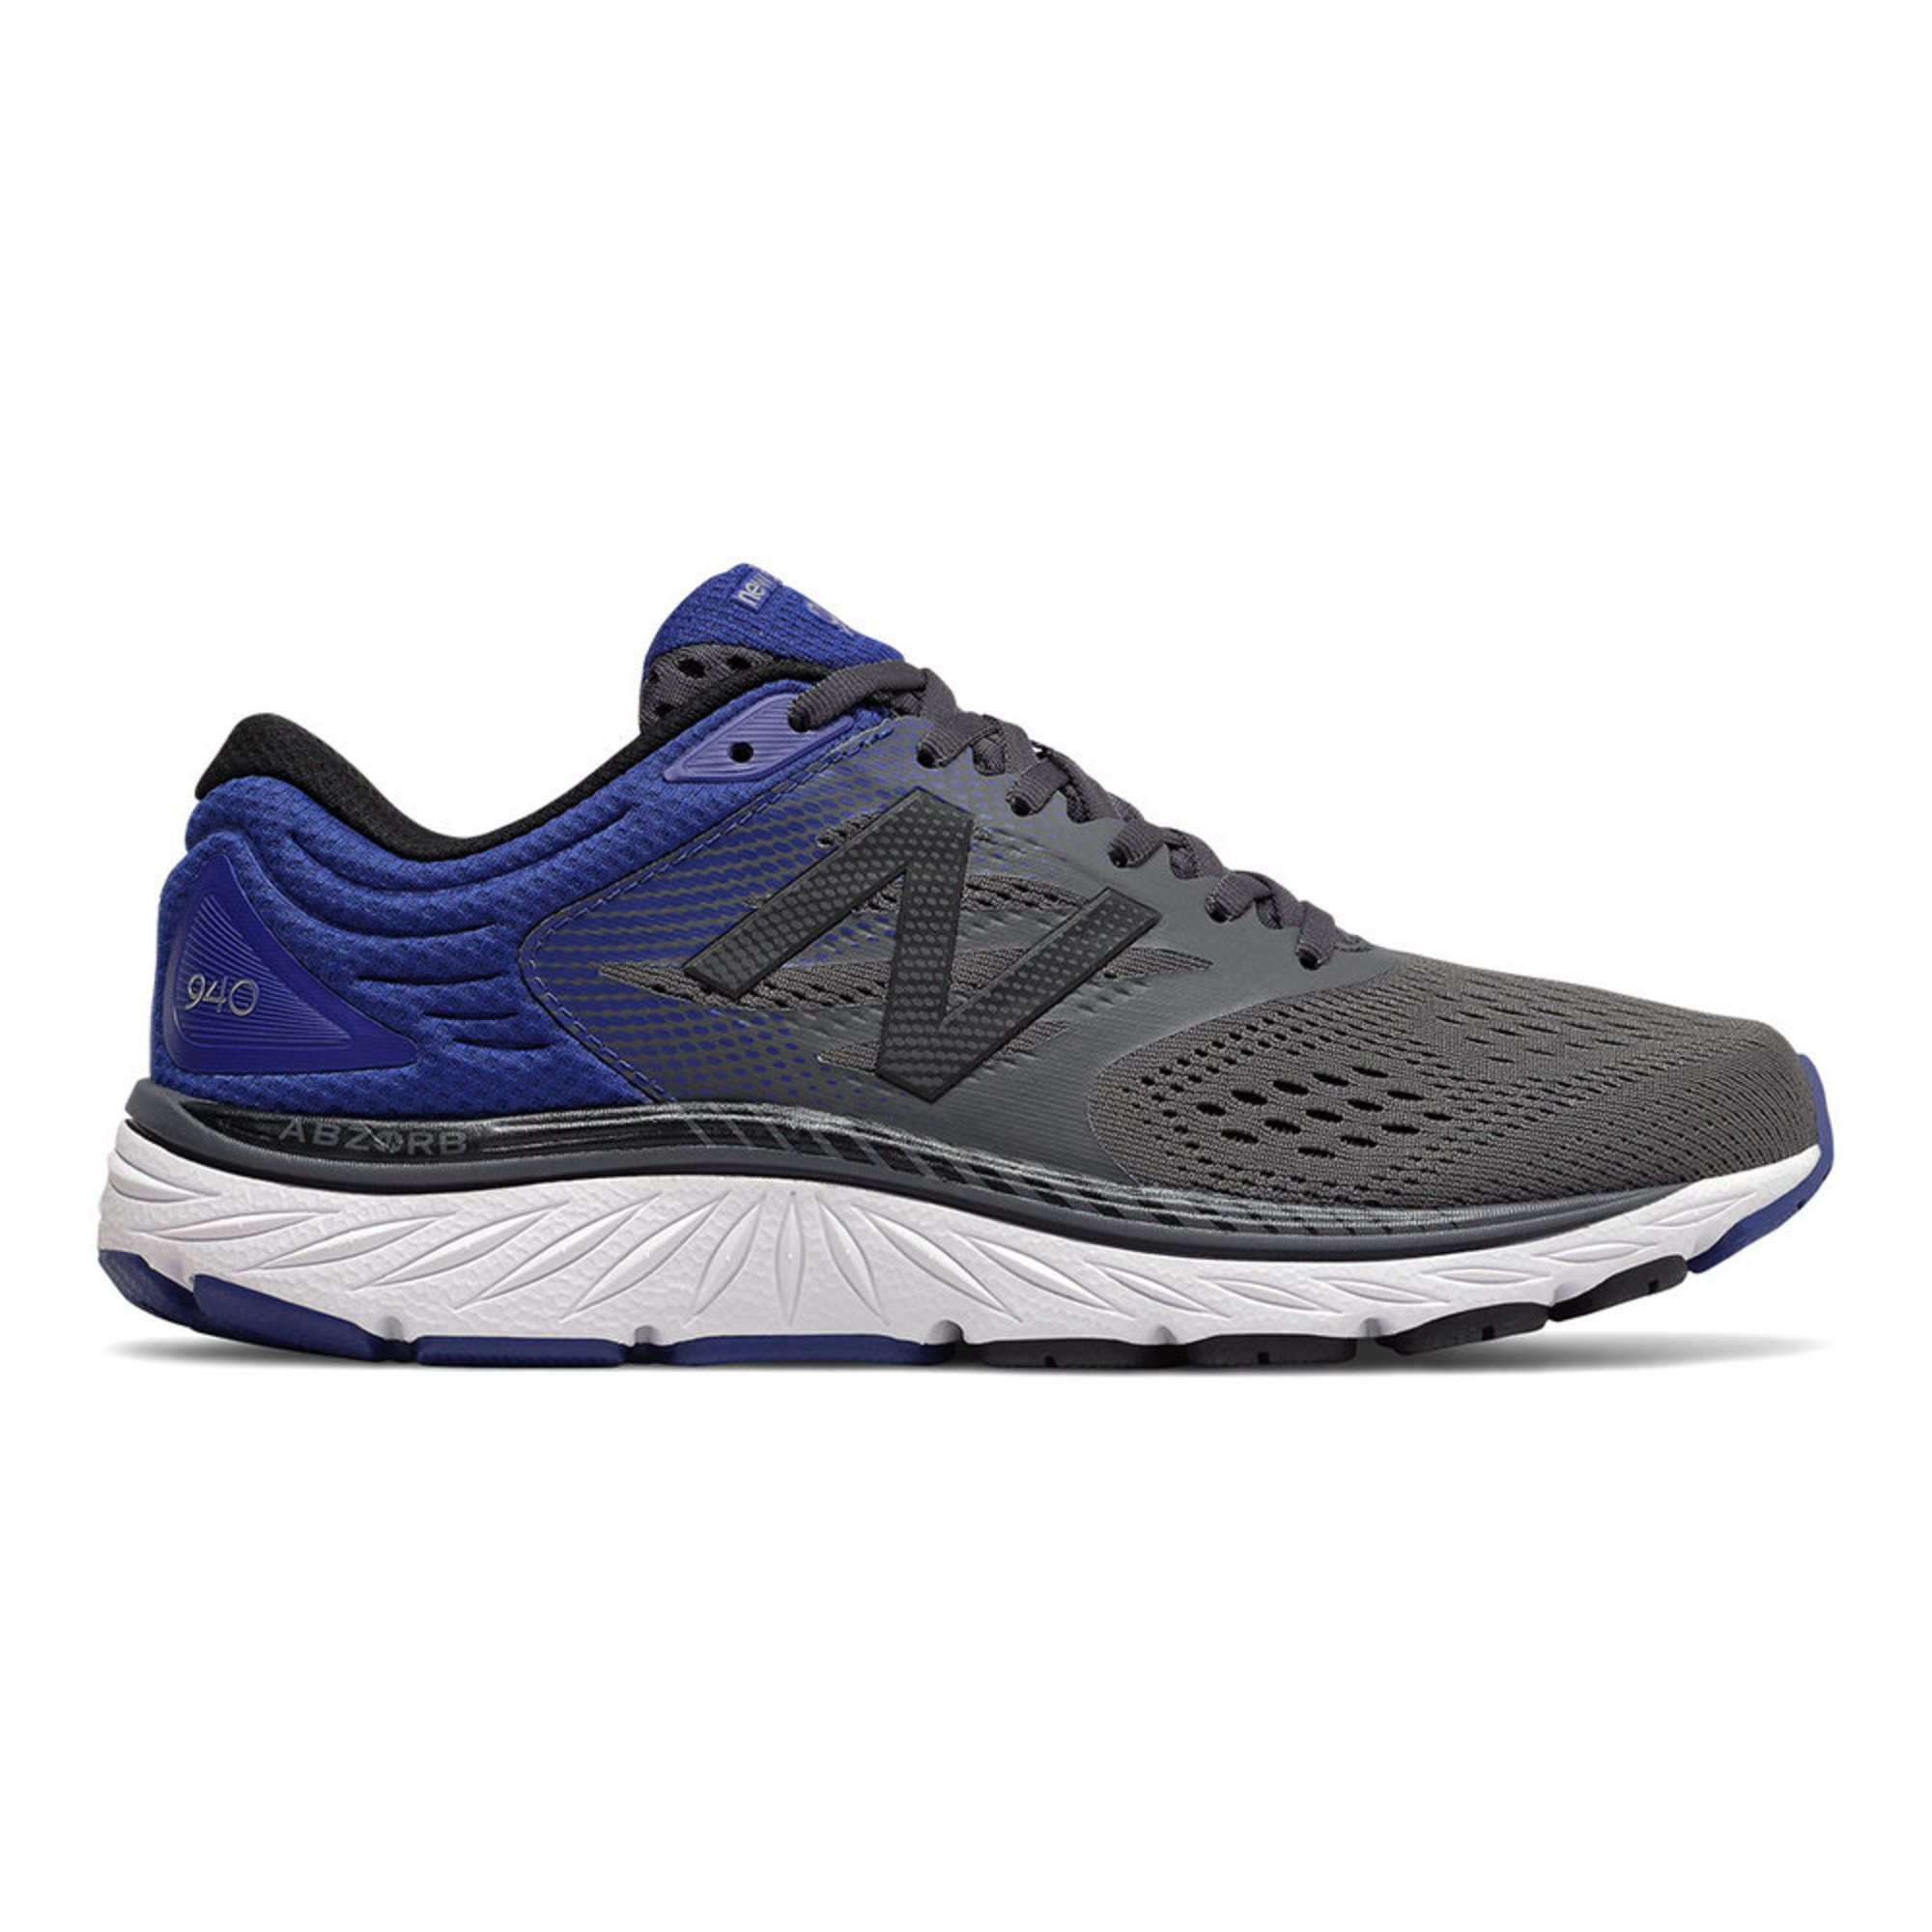 motion control running shoes new balance